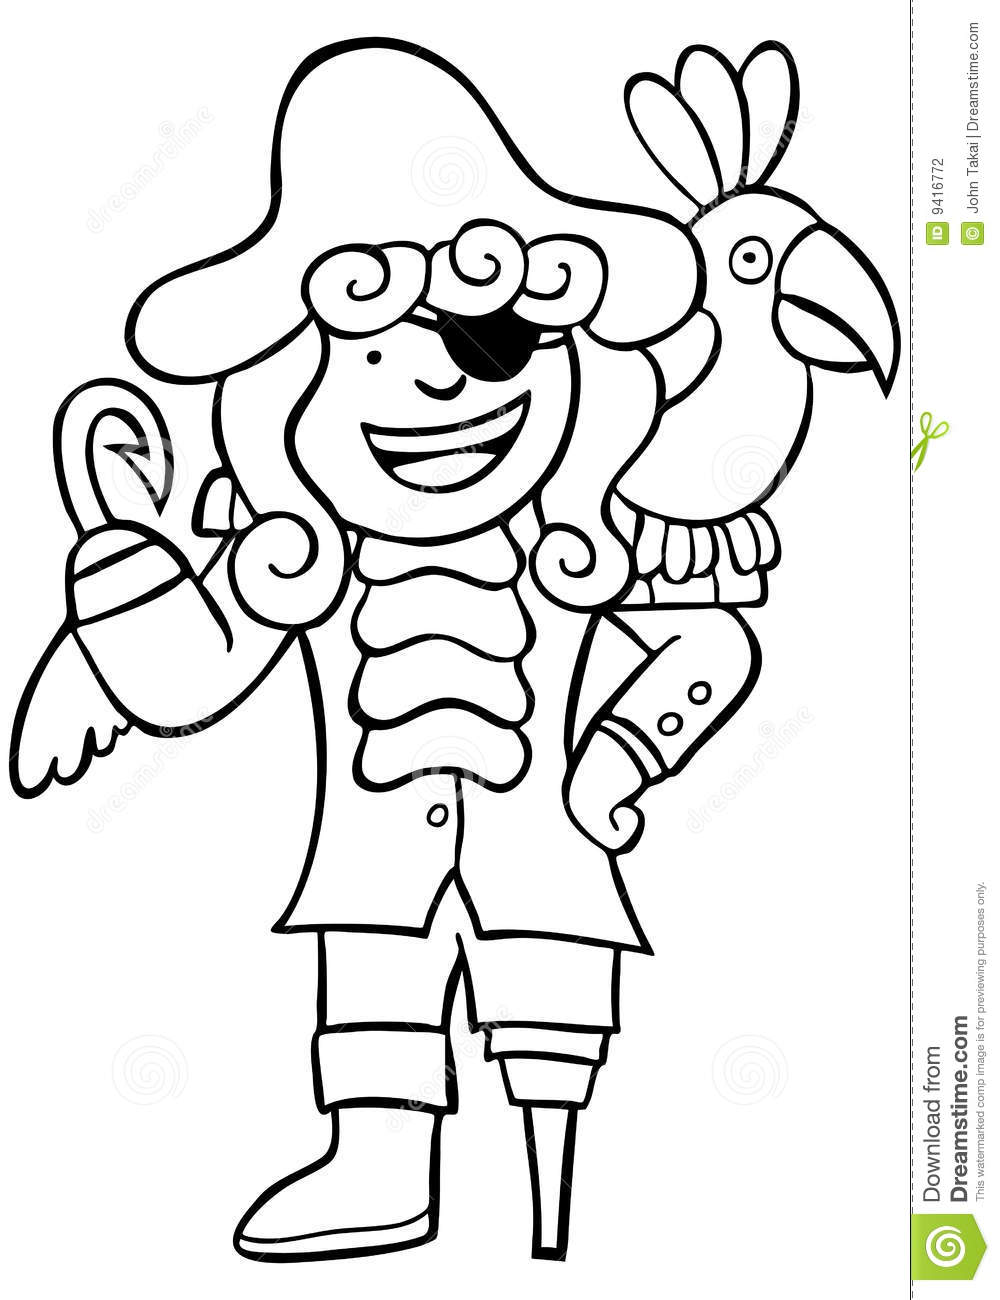 Pirate Clipart Black And White Friendly Pirate Parrot Black White